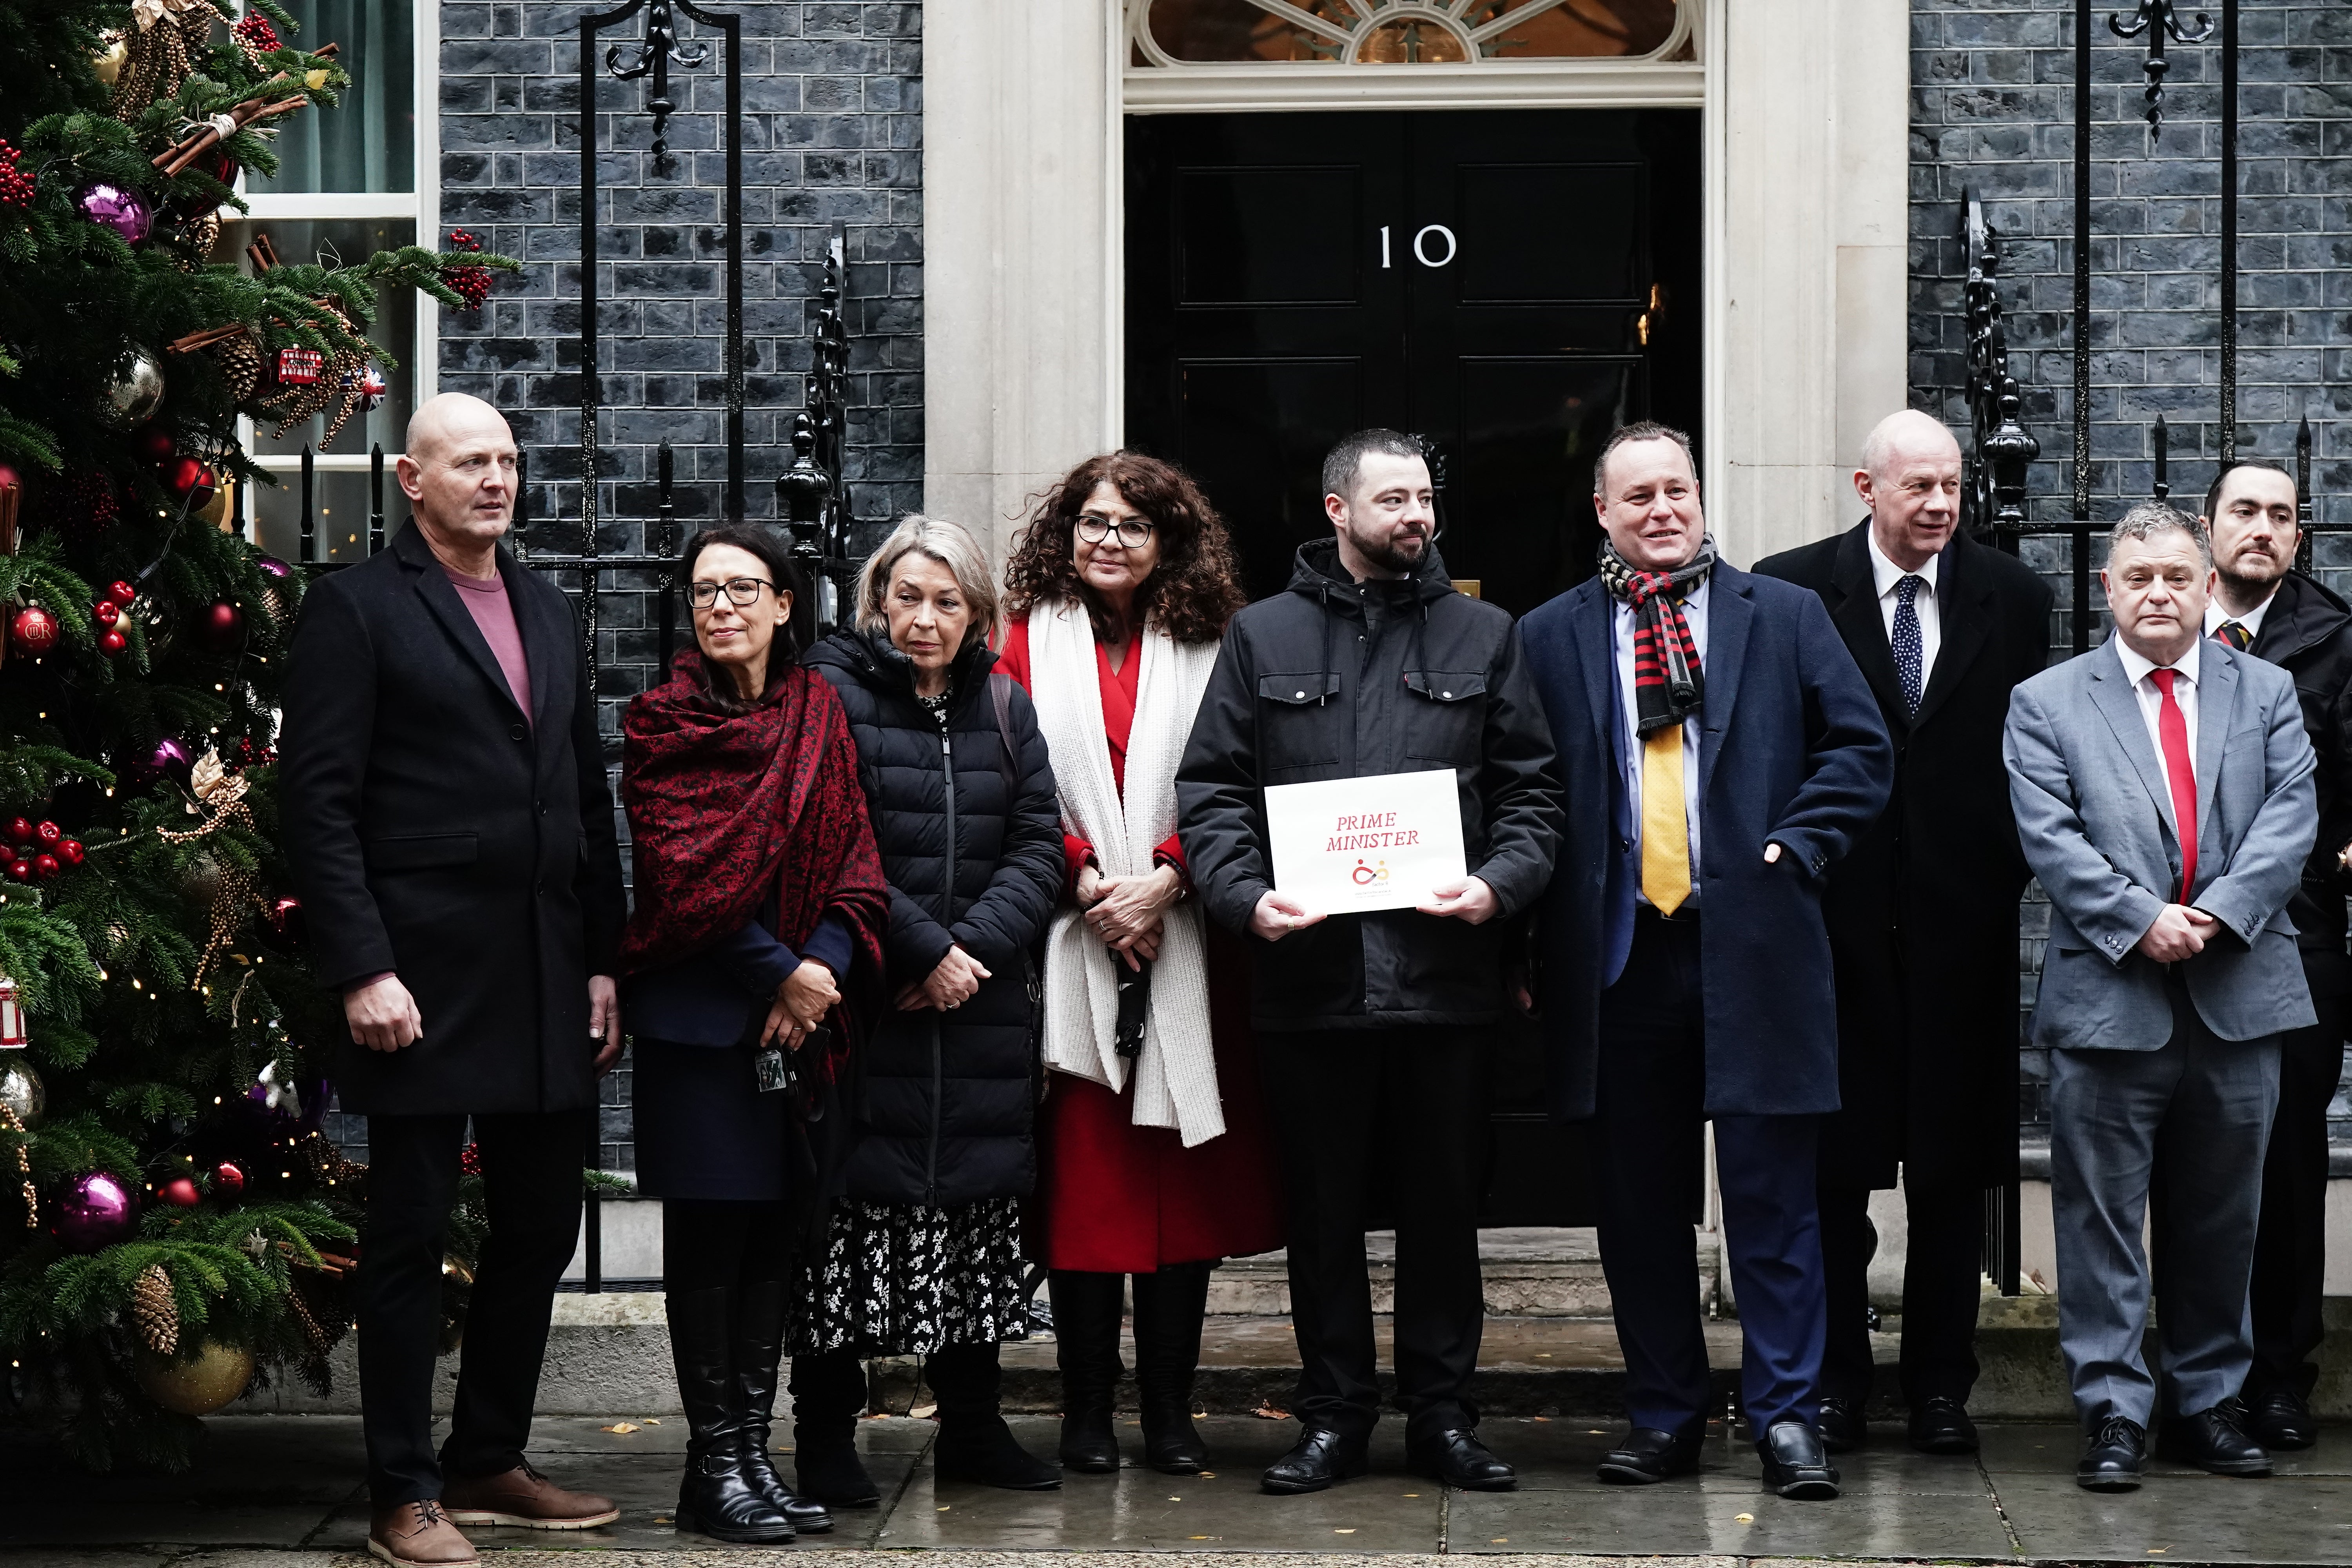 Dame Diana Johnson (fourth from left), Jason Evans (fifth from left), Damian Green (sixth from left) and other campaigners in Downing Street with a letter calling for faster compensation for victims of the infected blood scandal